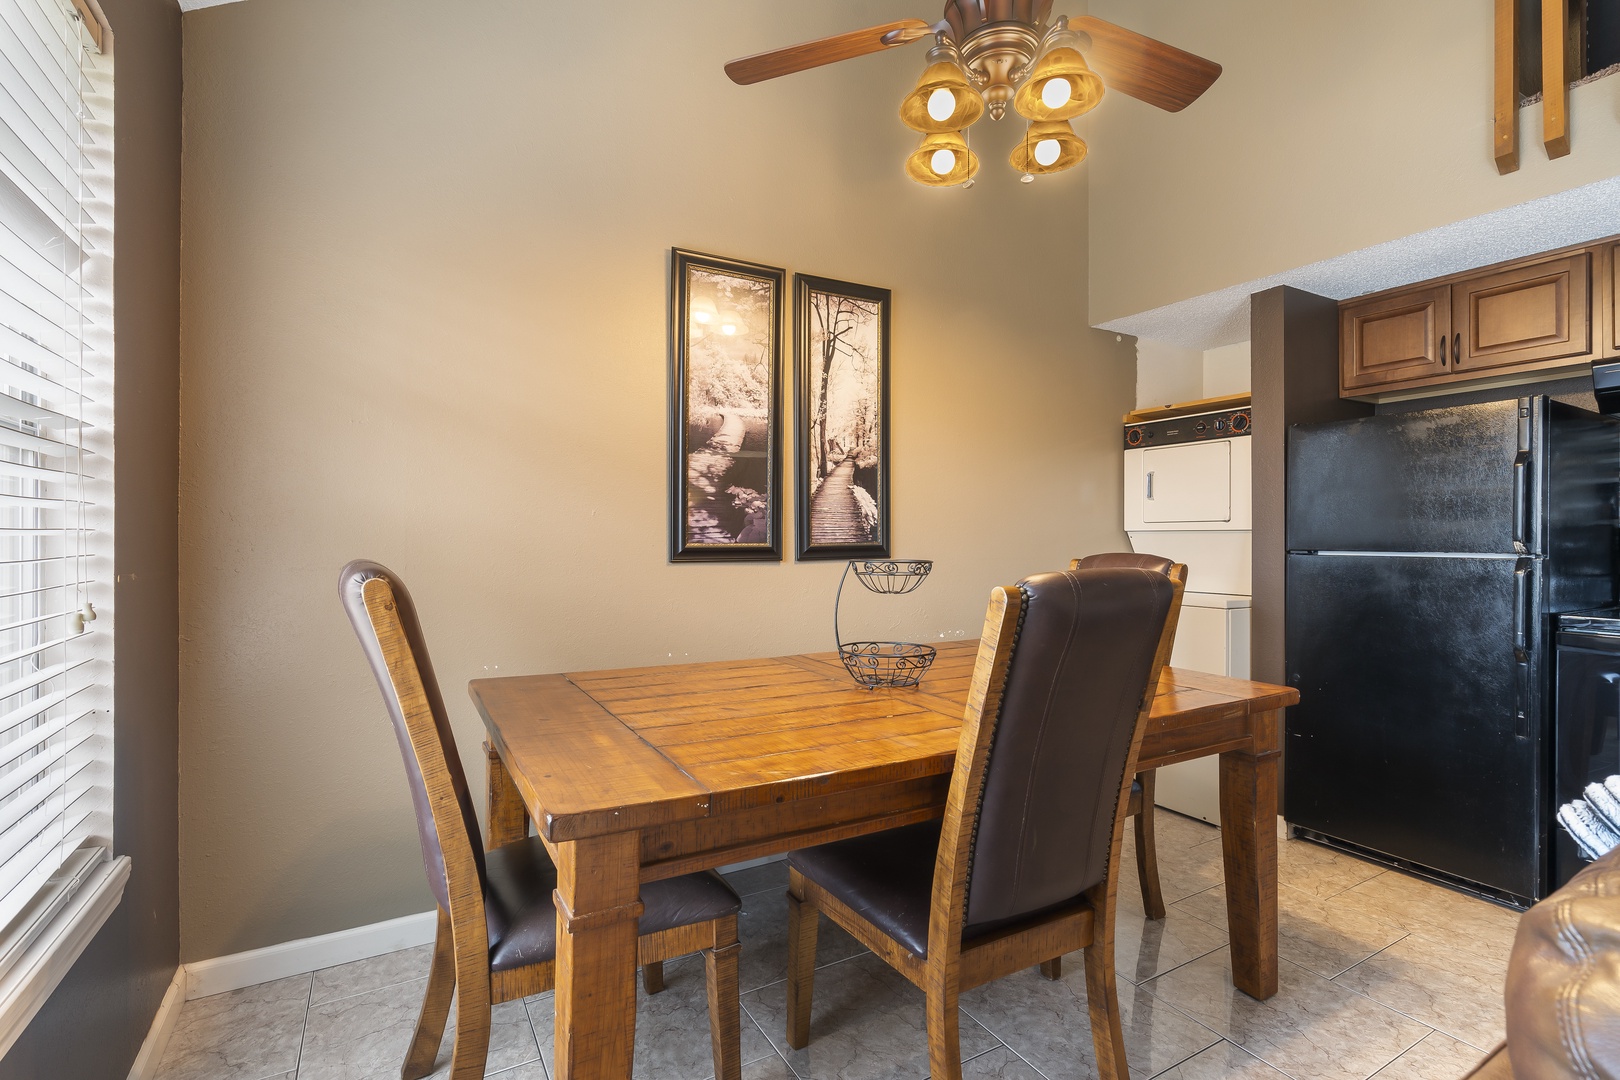 Gather for meals together at the dining table, with seating for 3